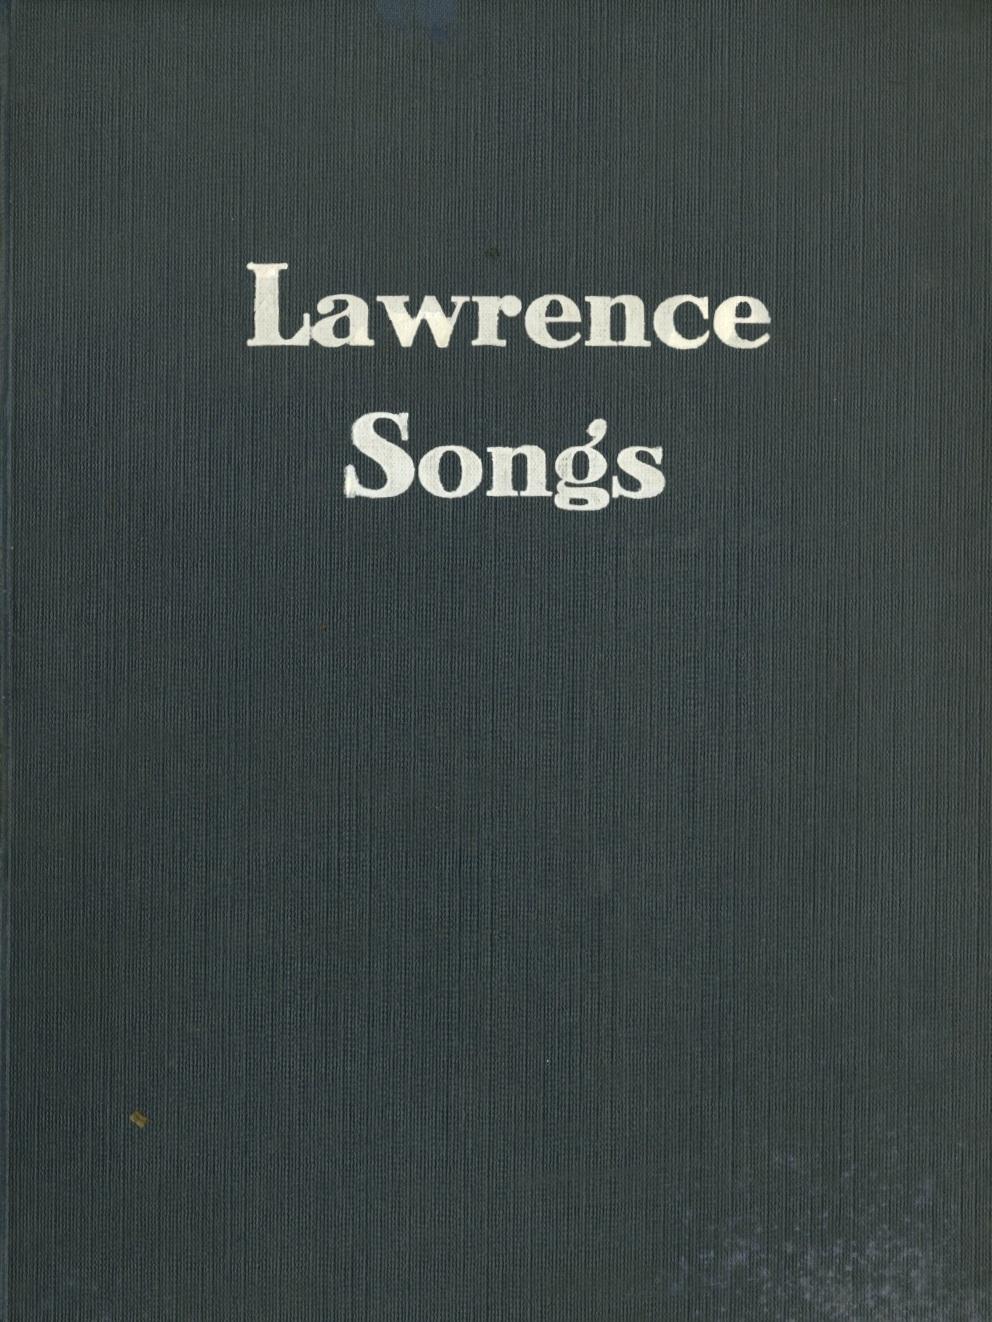 Cover of a Lawrence Songs songbook